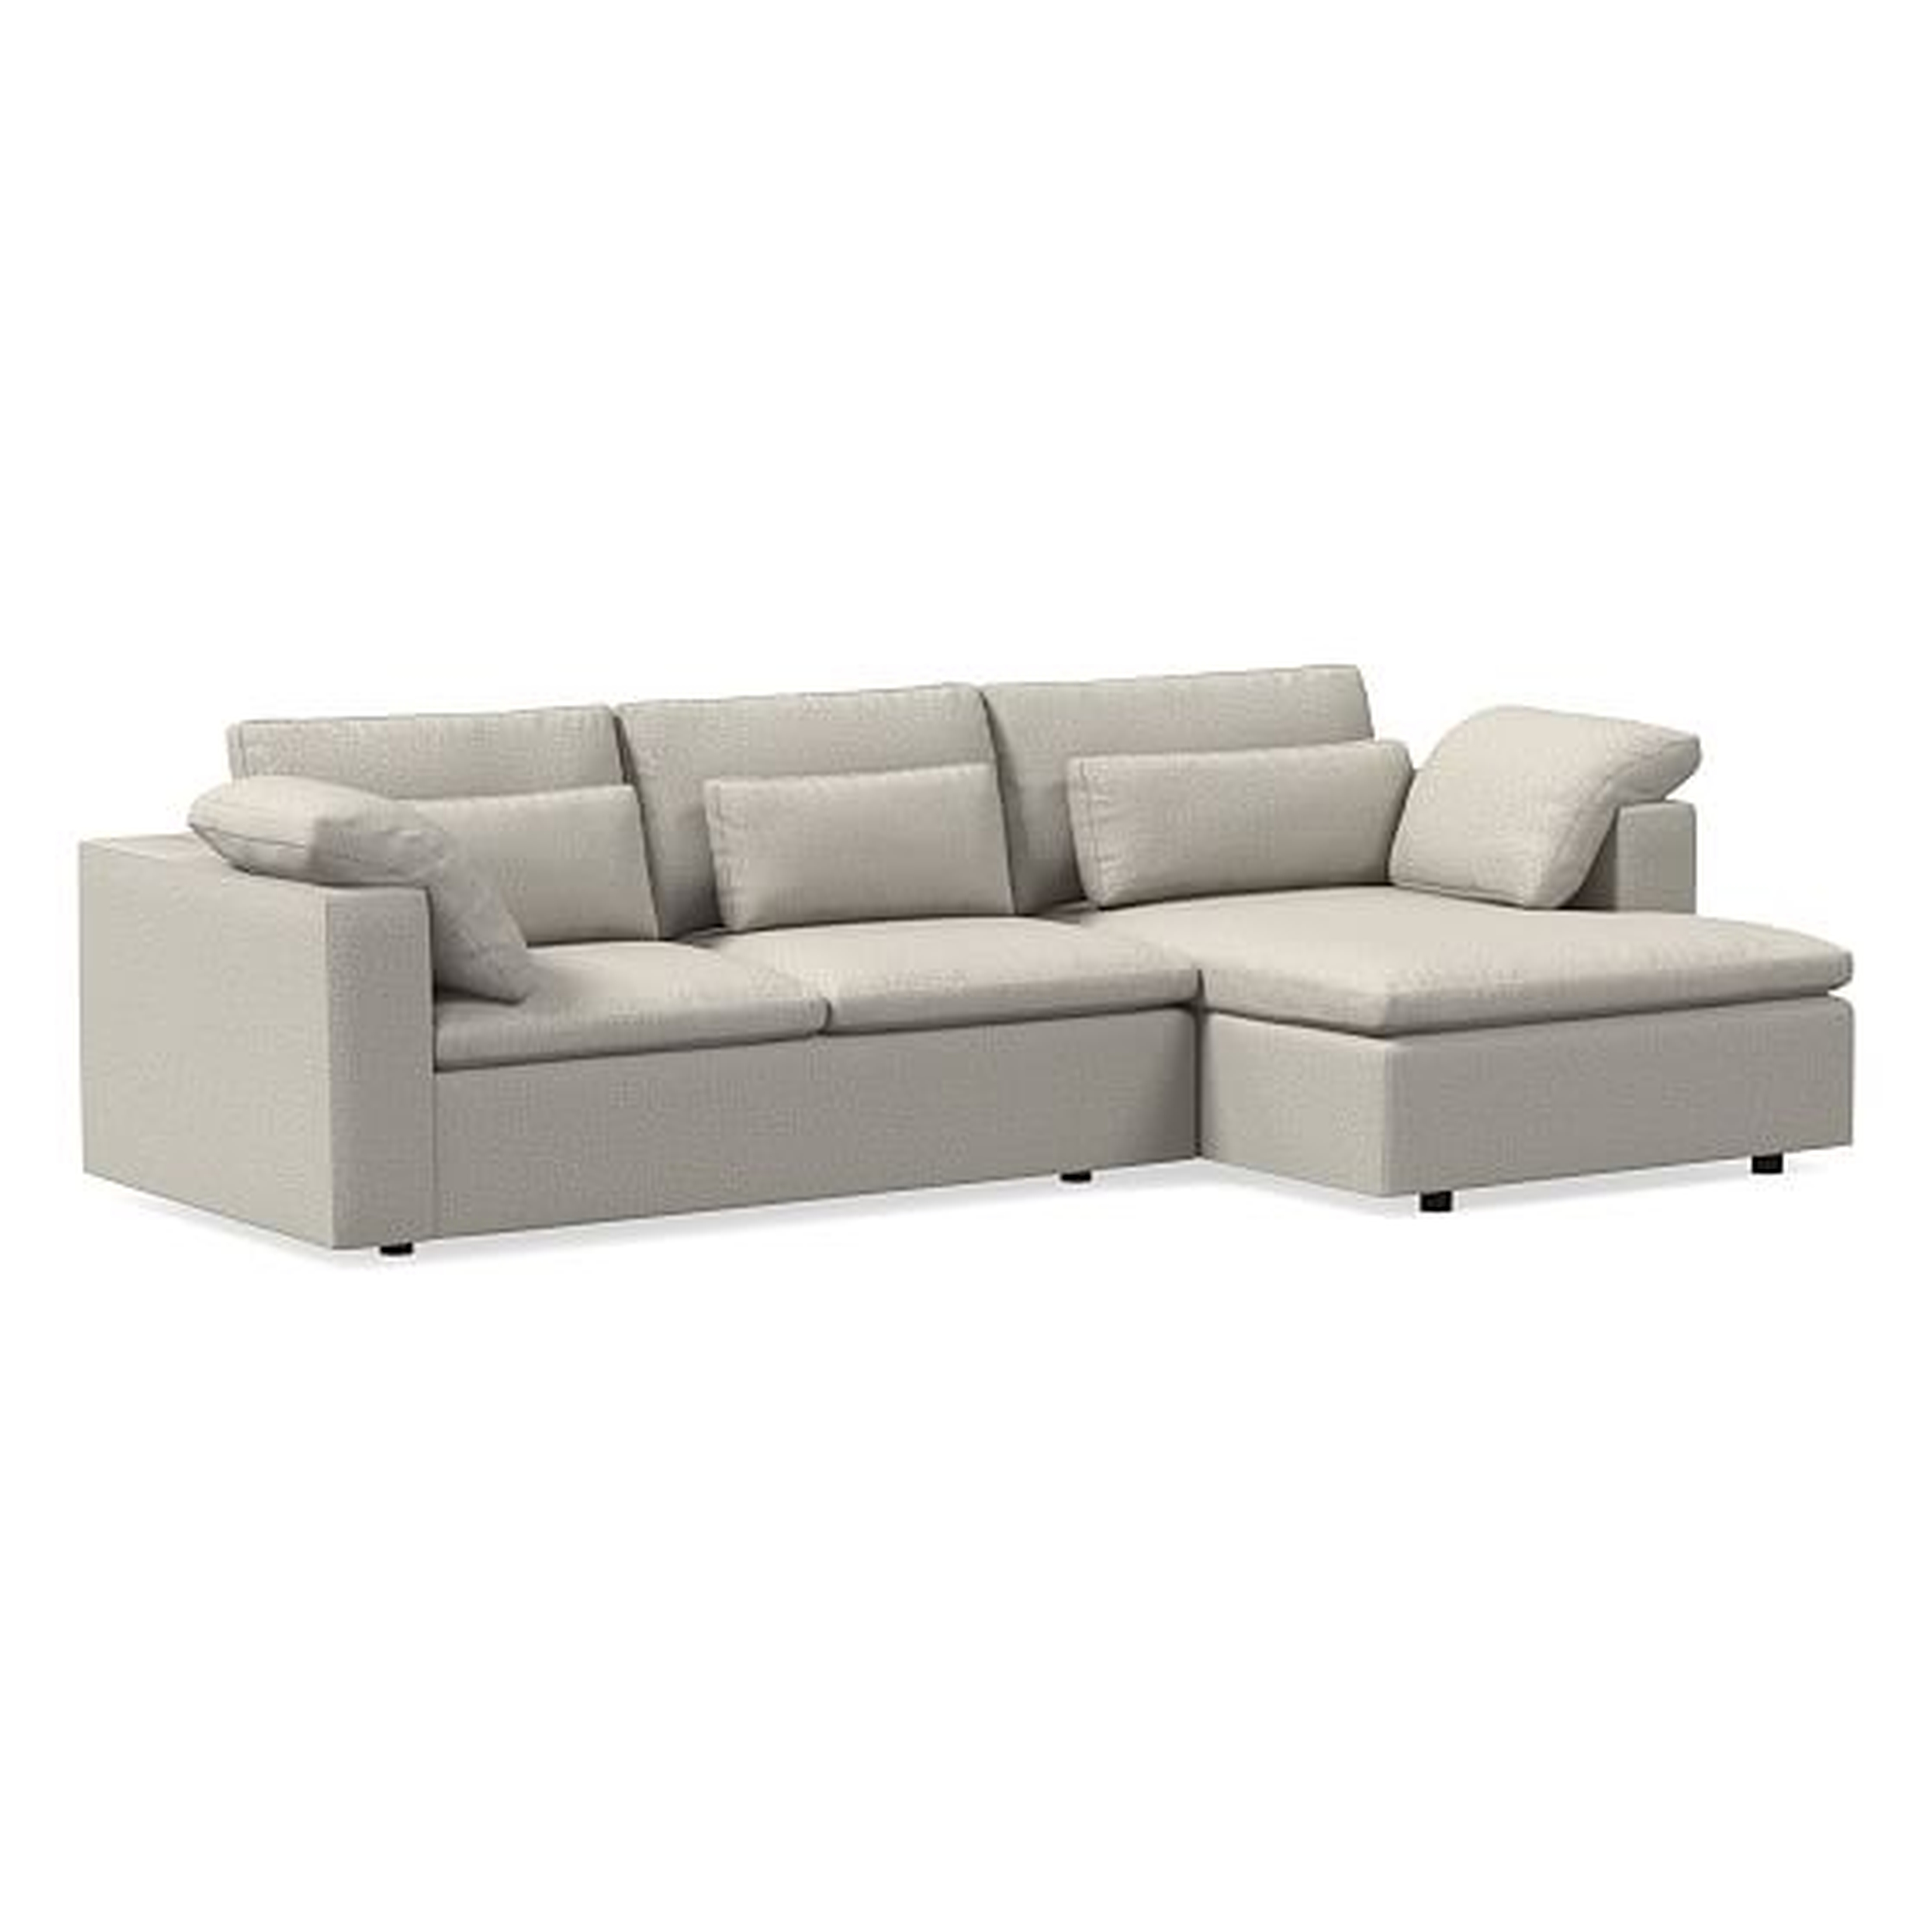 Harmony Modular Sectional Set 11: Petite Left Arm Sofa, Petite Right Arm Chaise, Down, Performance Twill, Stone, Concealed Supports - West Elm